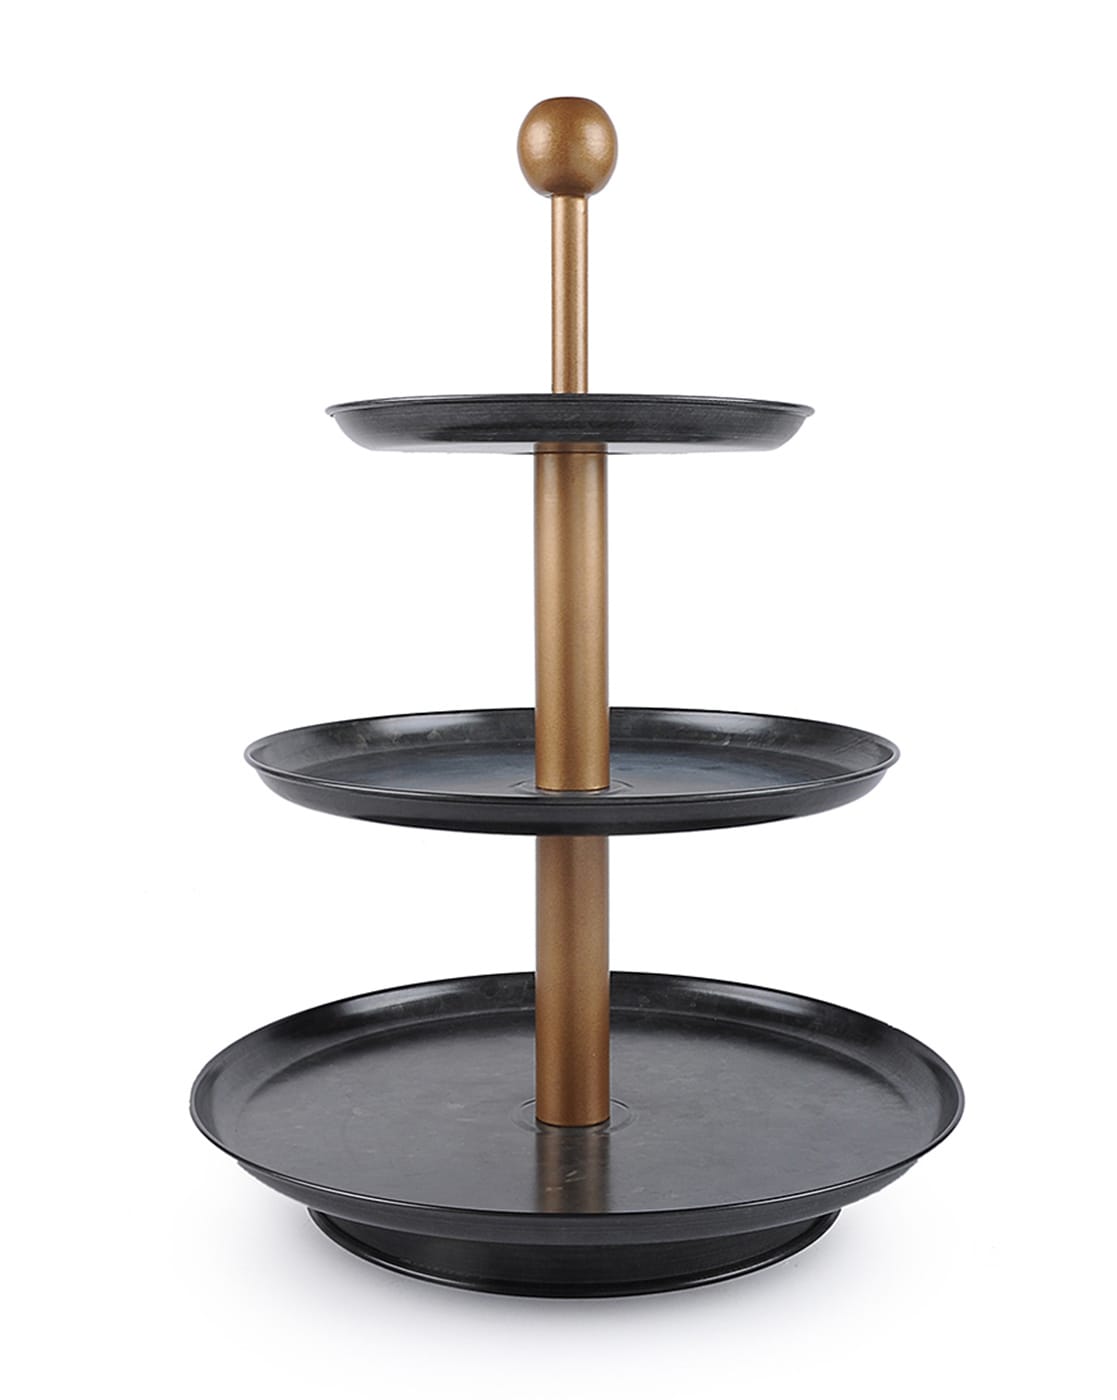 Buy Plata 4 Tier Cake Stand Online – Address Home